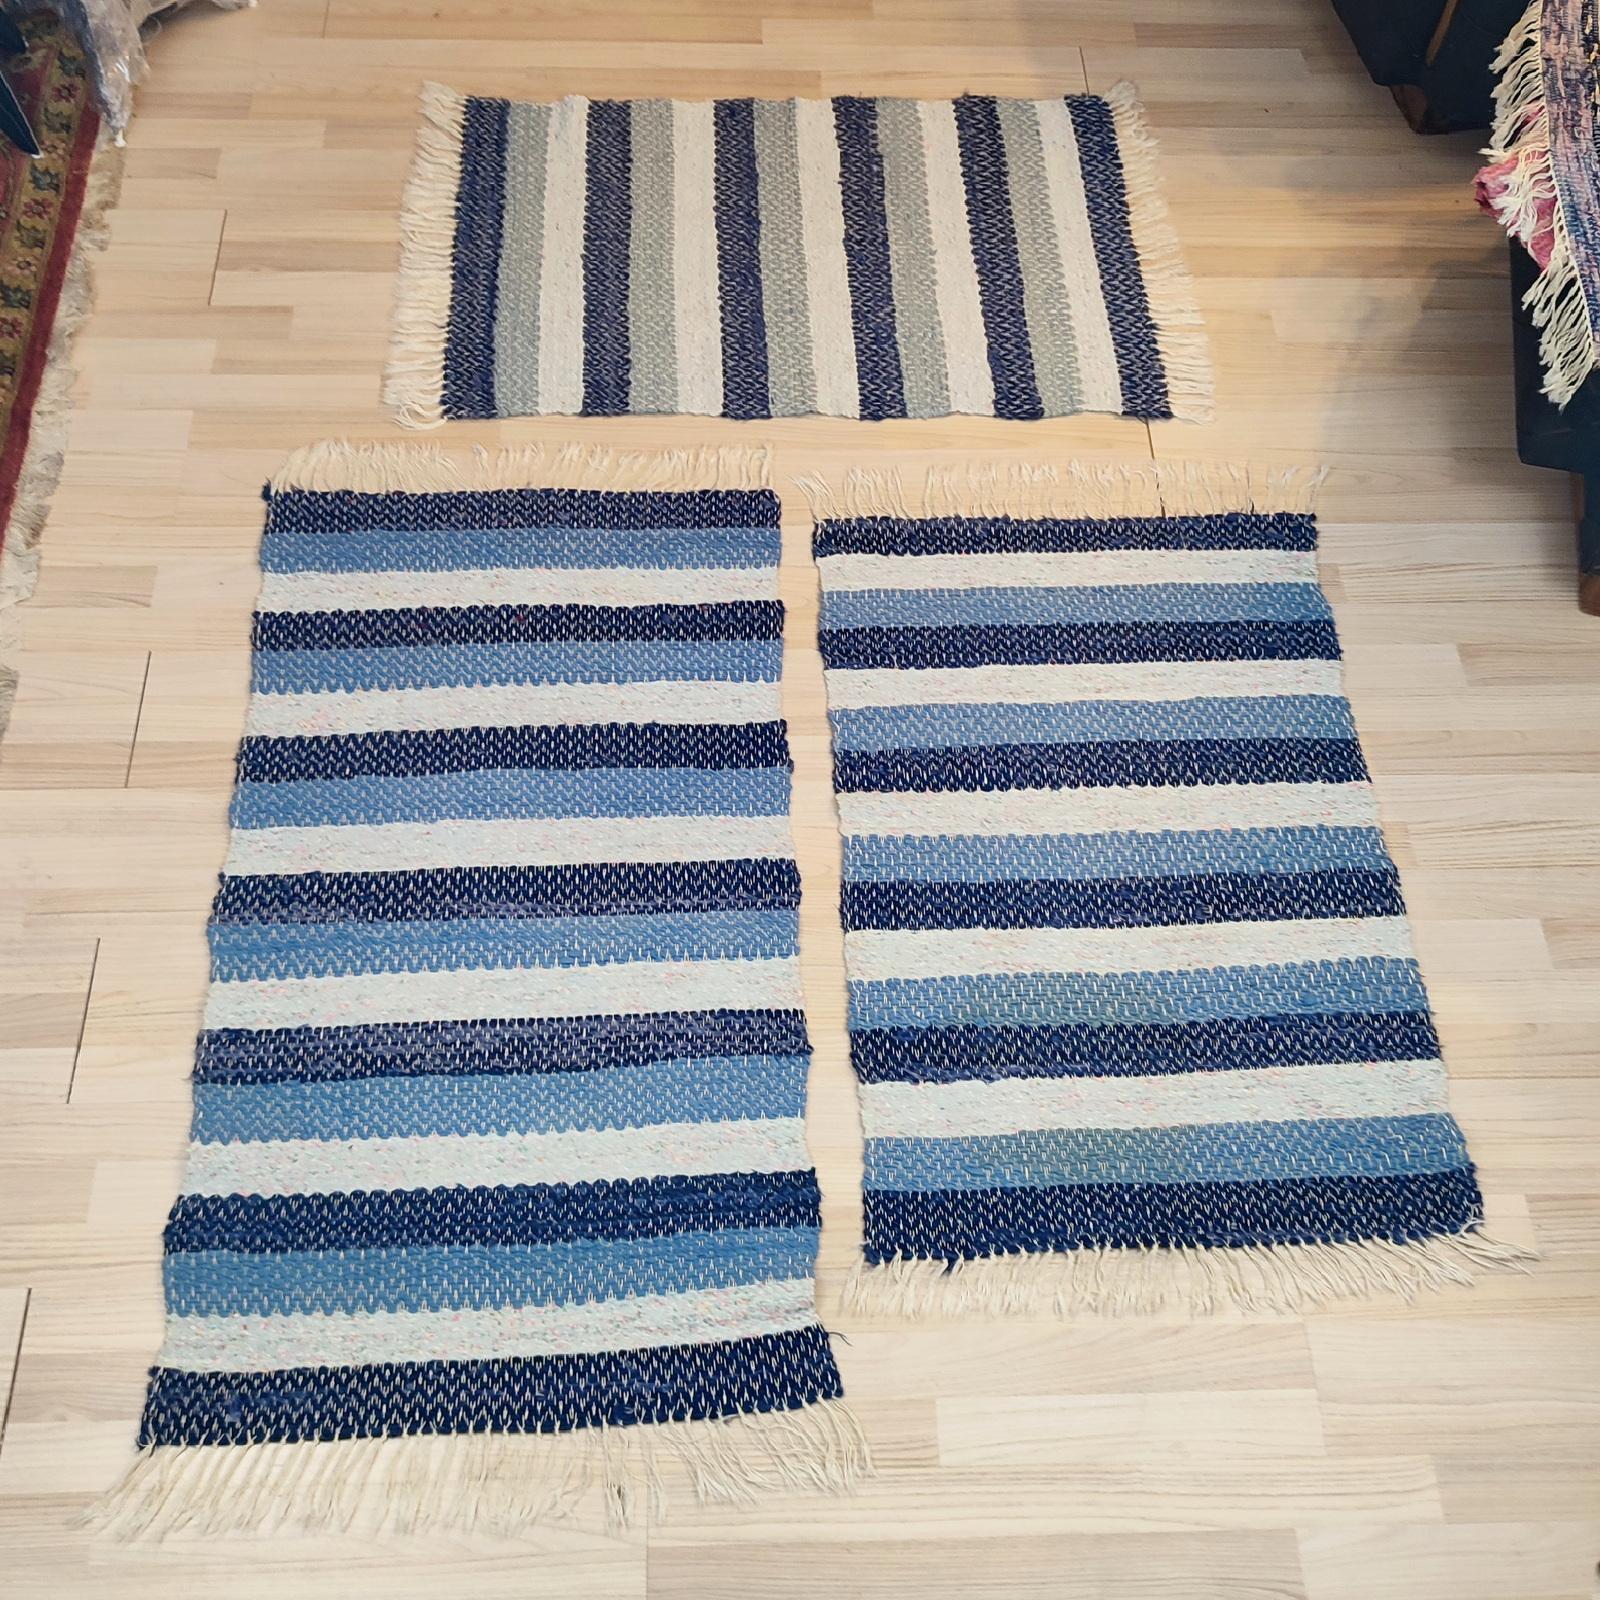 Mid-20th-century Swedish set of 3 rag rugs. 
Design in alternate stripes of blue shades and ecru.
Dimensions:
65x130 cm
65x115 cm
65x115 cm

In a very good used condition. 